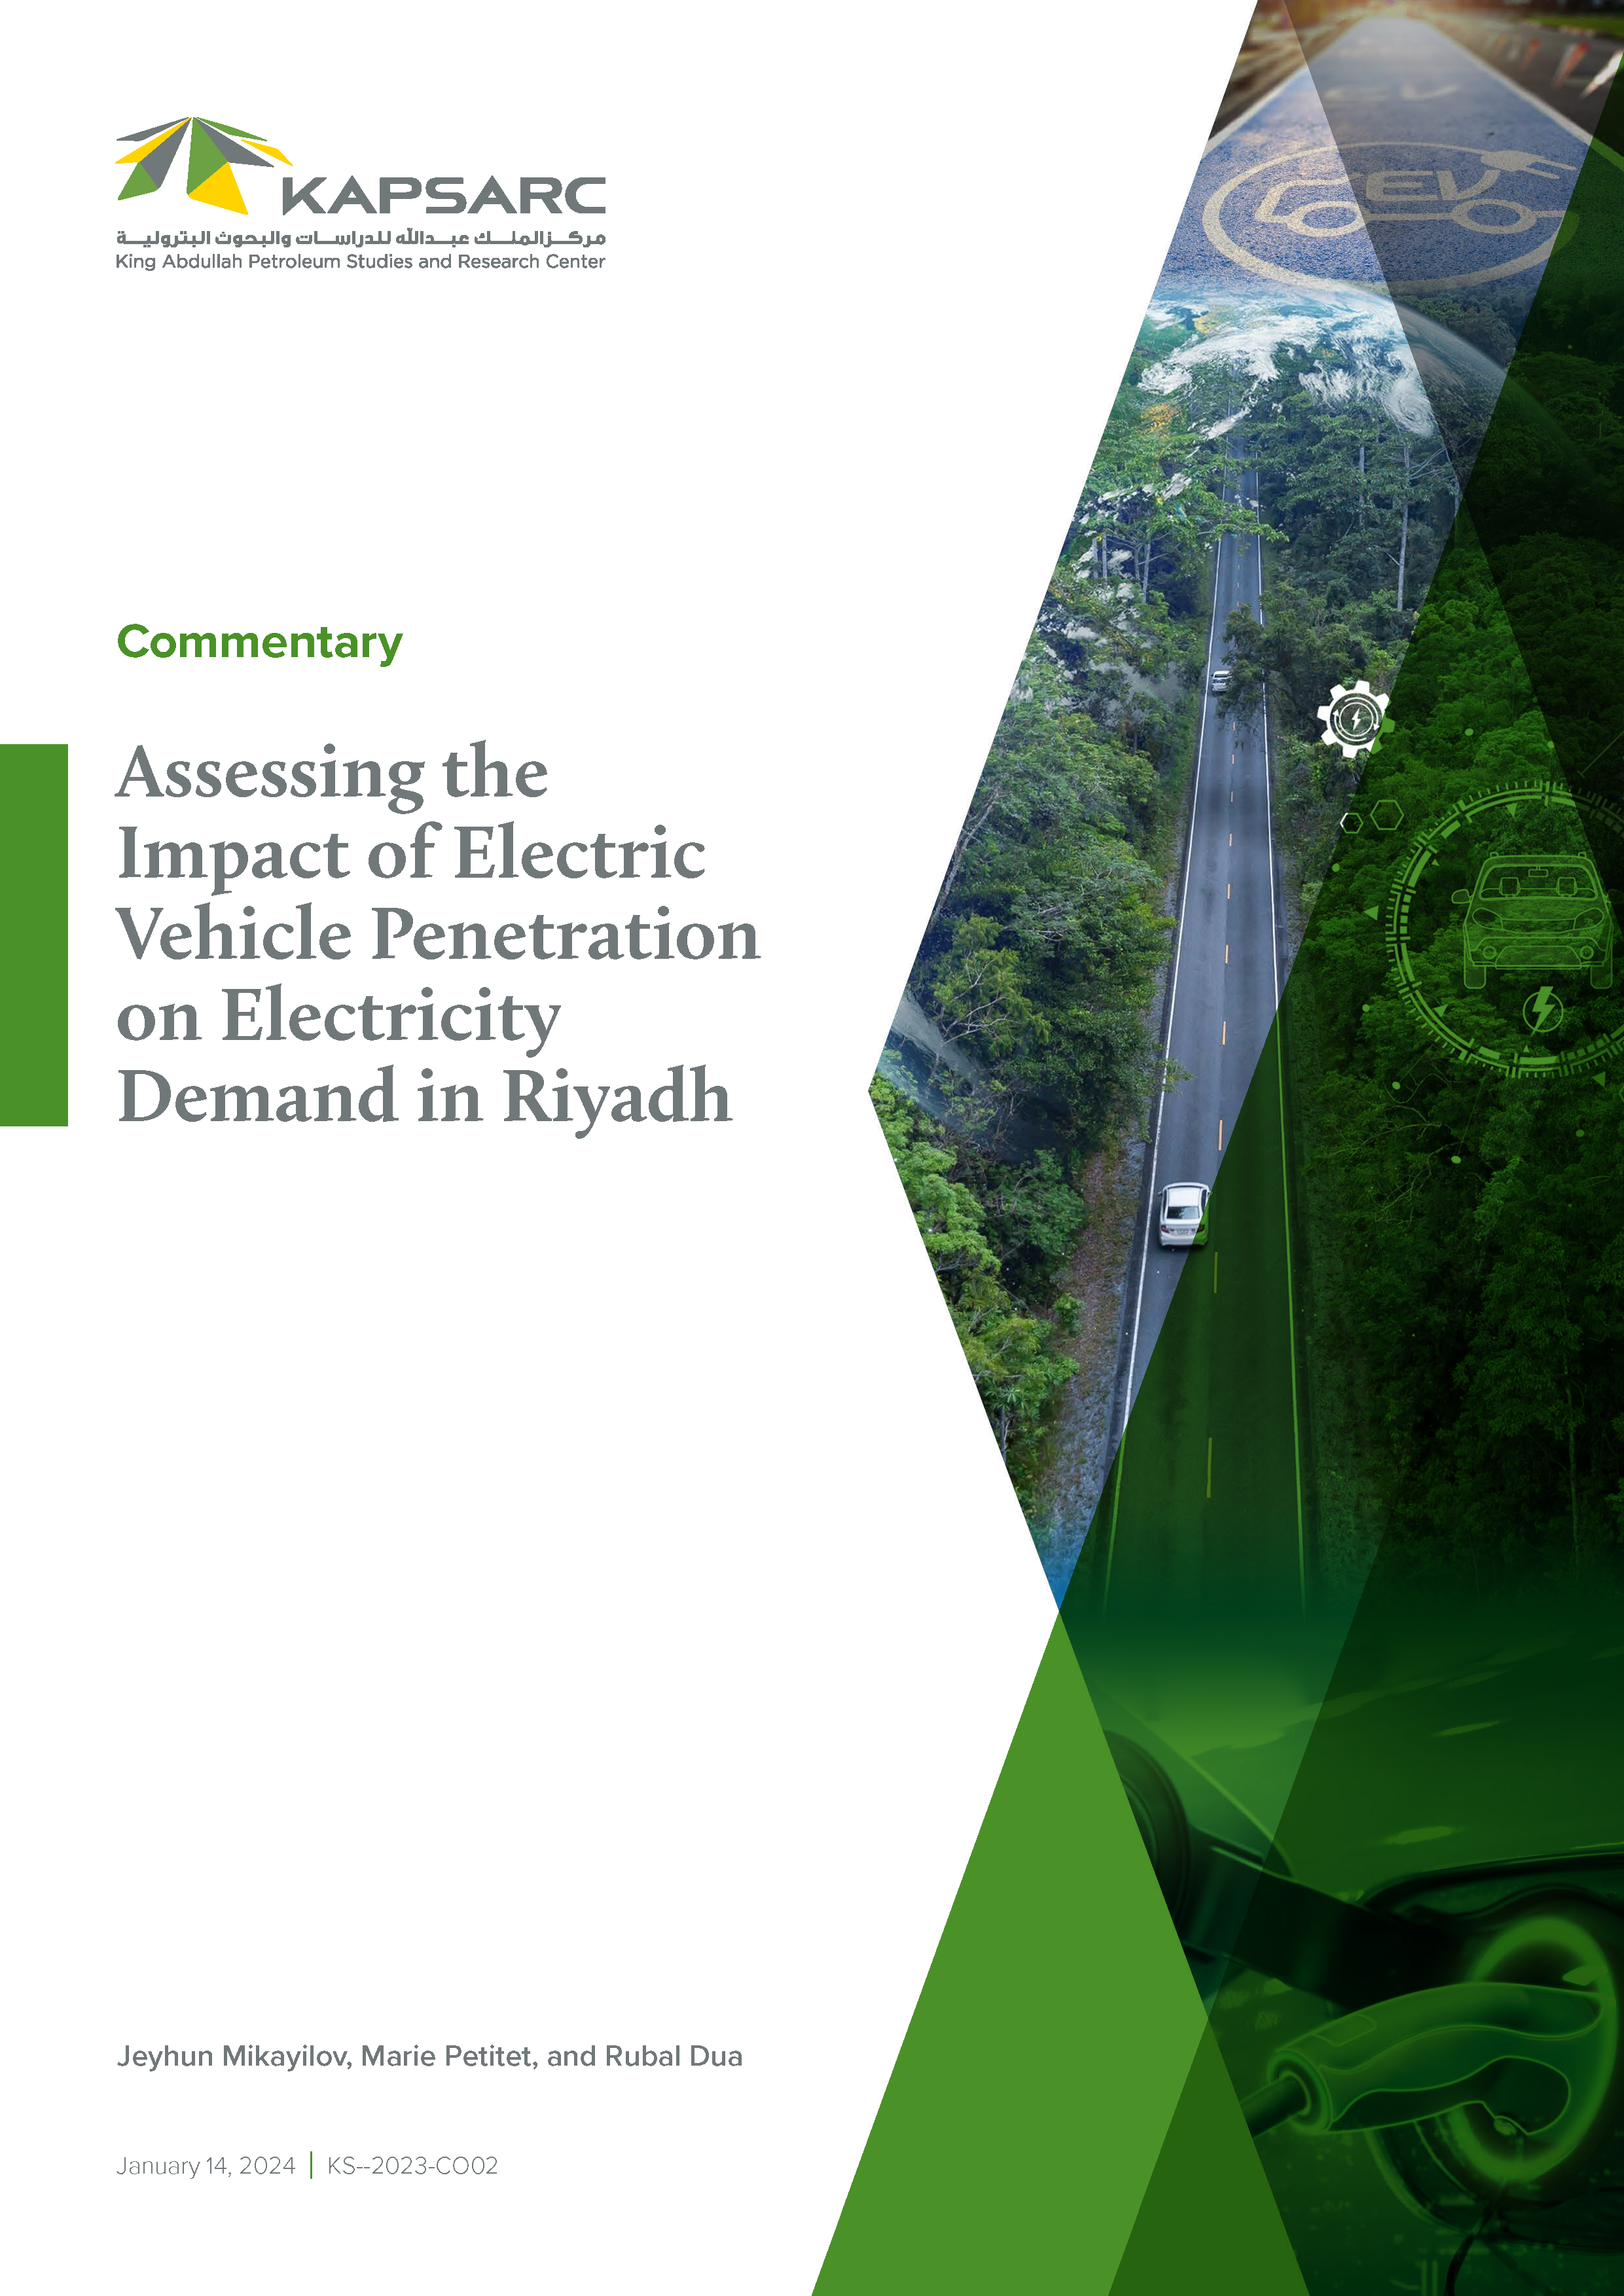 Assessing the Impact of Electric Vehicle Penetration on Electricity Demand in Riyadh